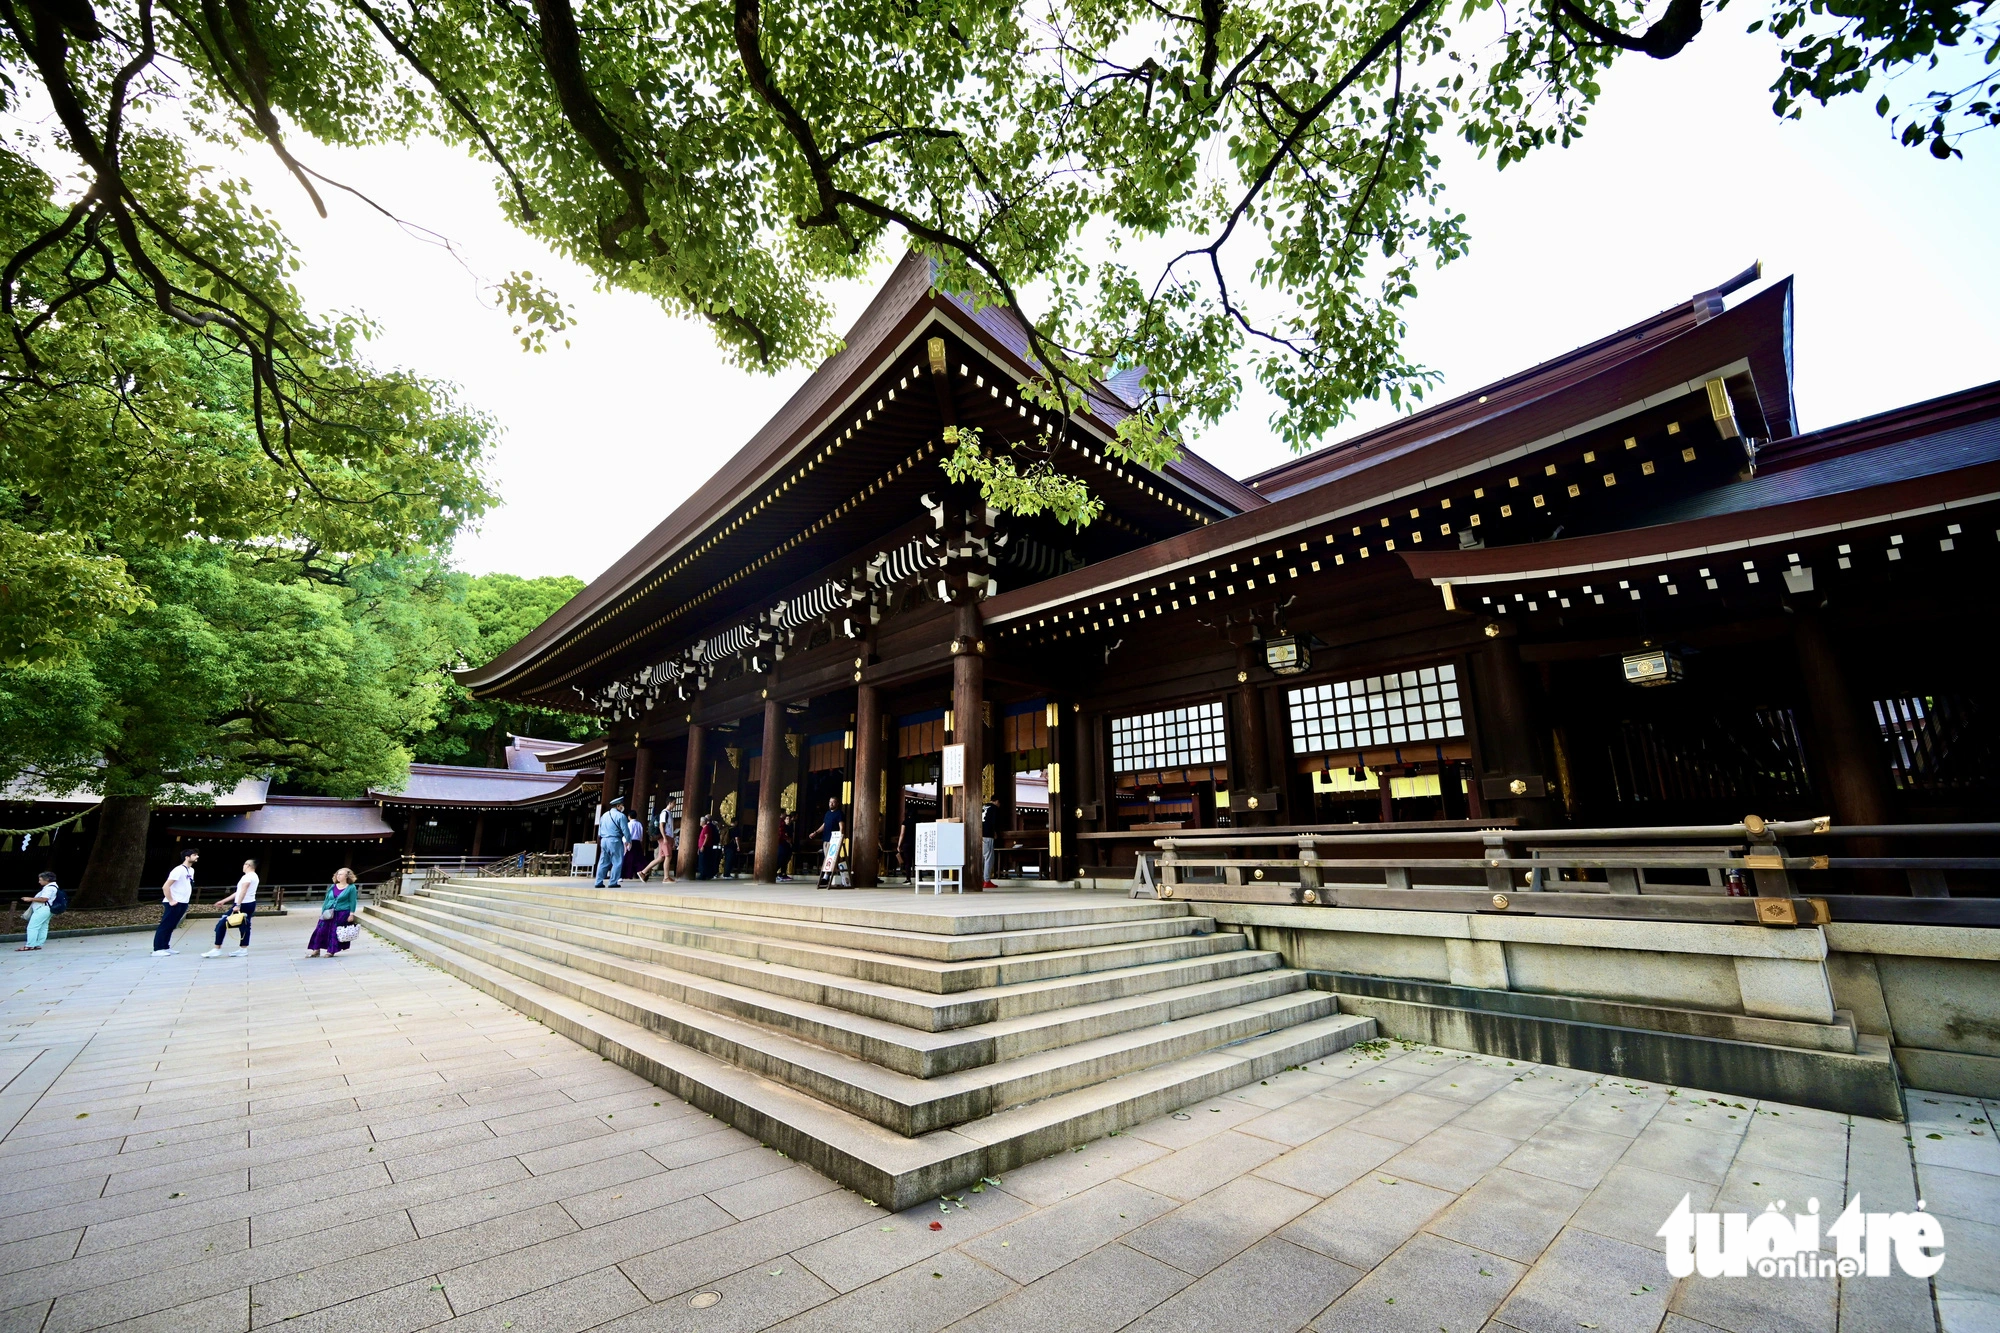 Meiji-jingu, a shrine dedicated to the deified spirits of Emperor Meiji and his wife, is located next to the Yoyogi Park